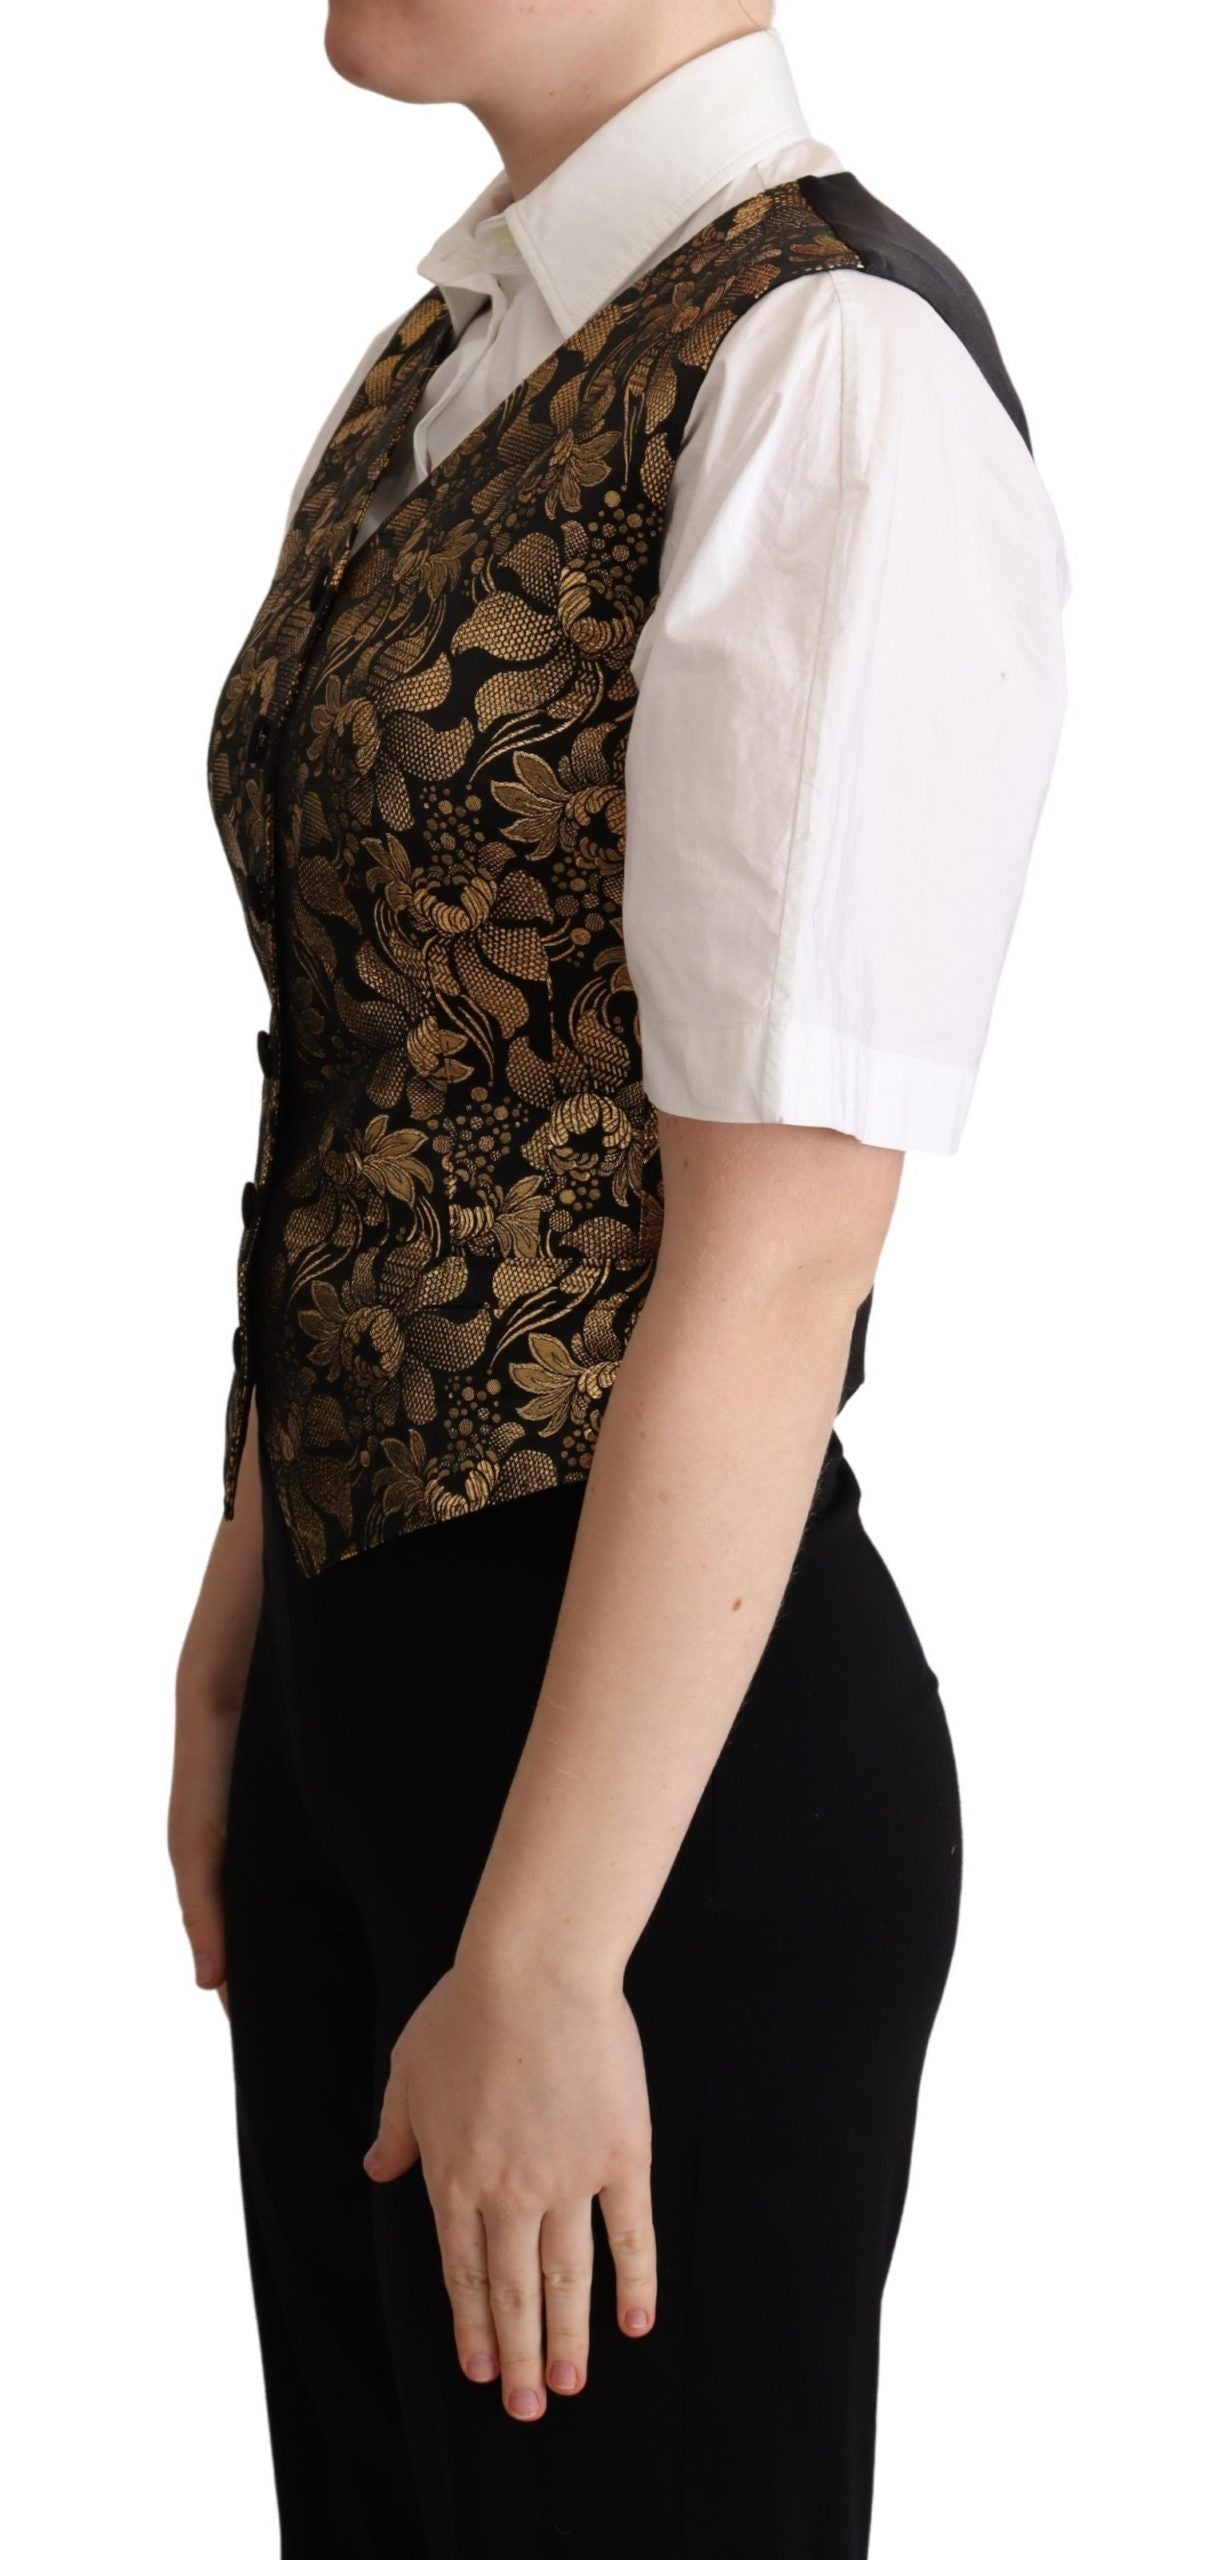 Dolce & Gabbana Black Gold Jacquard Silk Waistcoat Vest - Designed by Dolce & Gabbana Available to Buy at a Discounted Price on Moon Behind The Hill Online Designer Discount Store